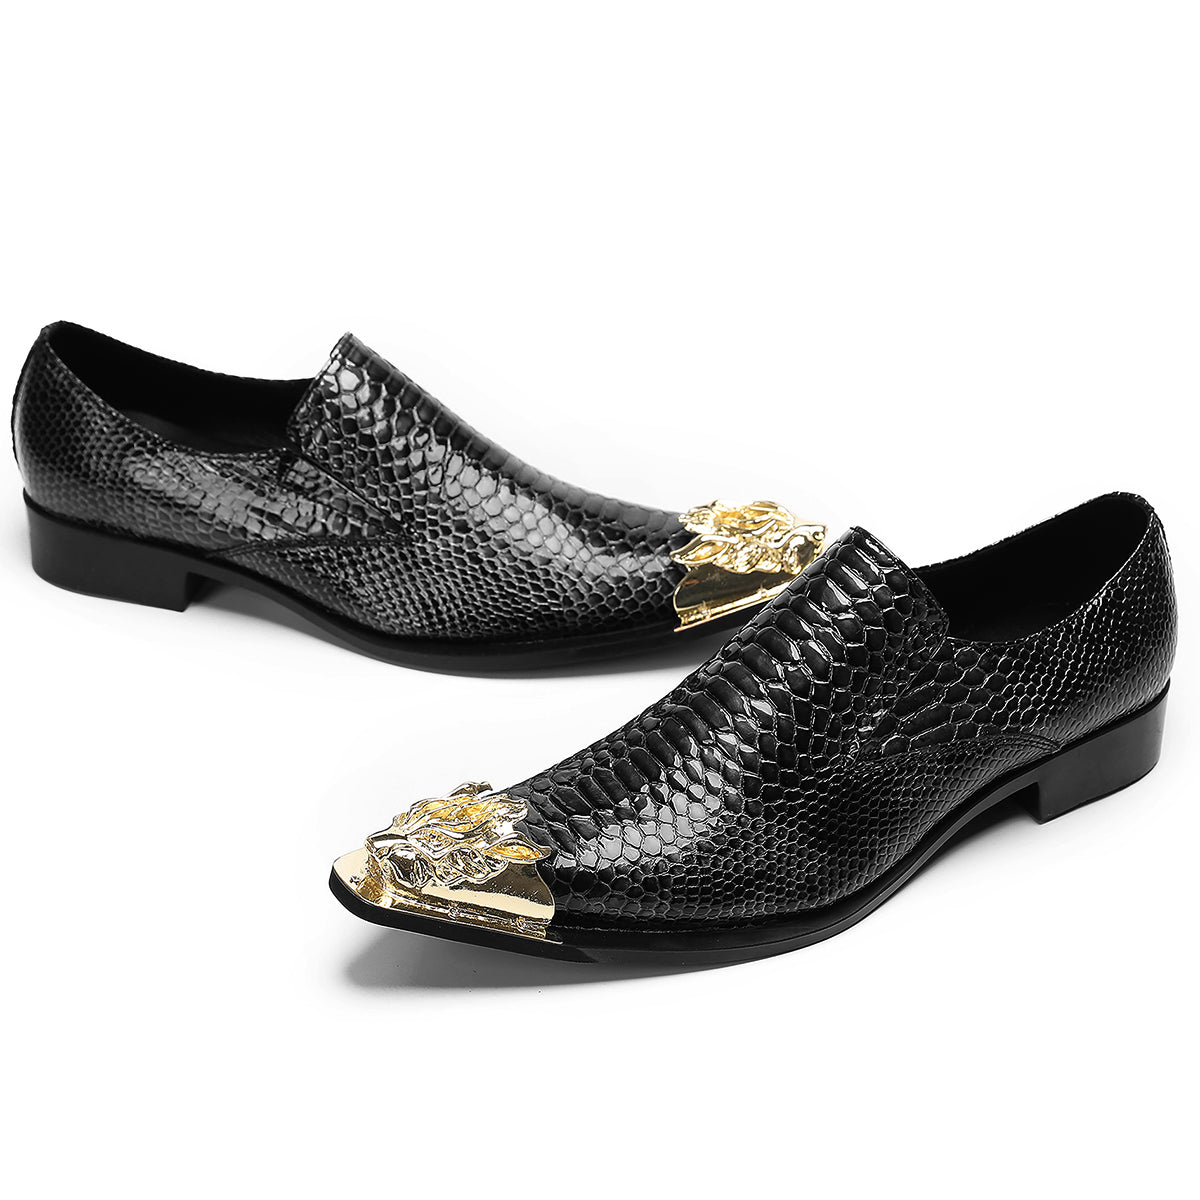 Men's Casual Metal-Tip Toe Penny Loafers